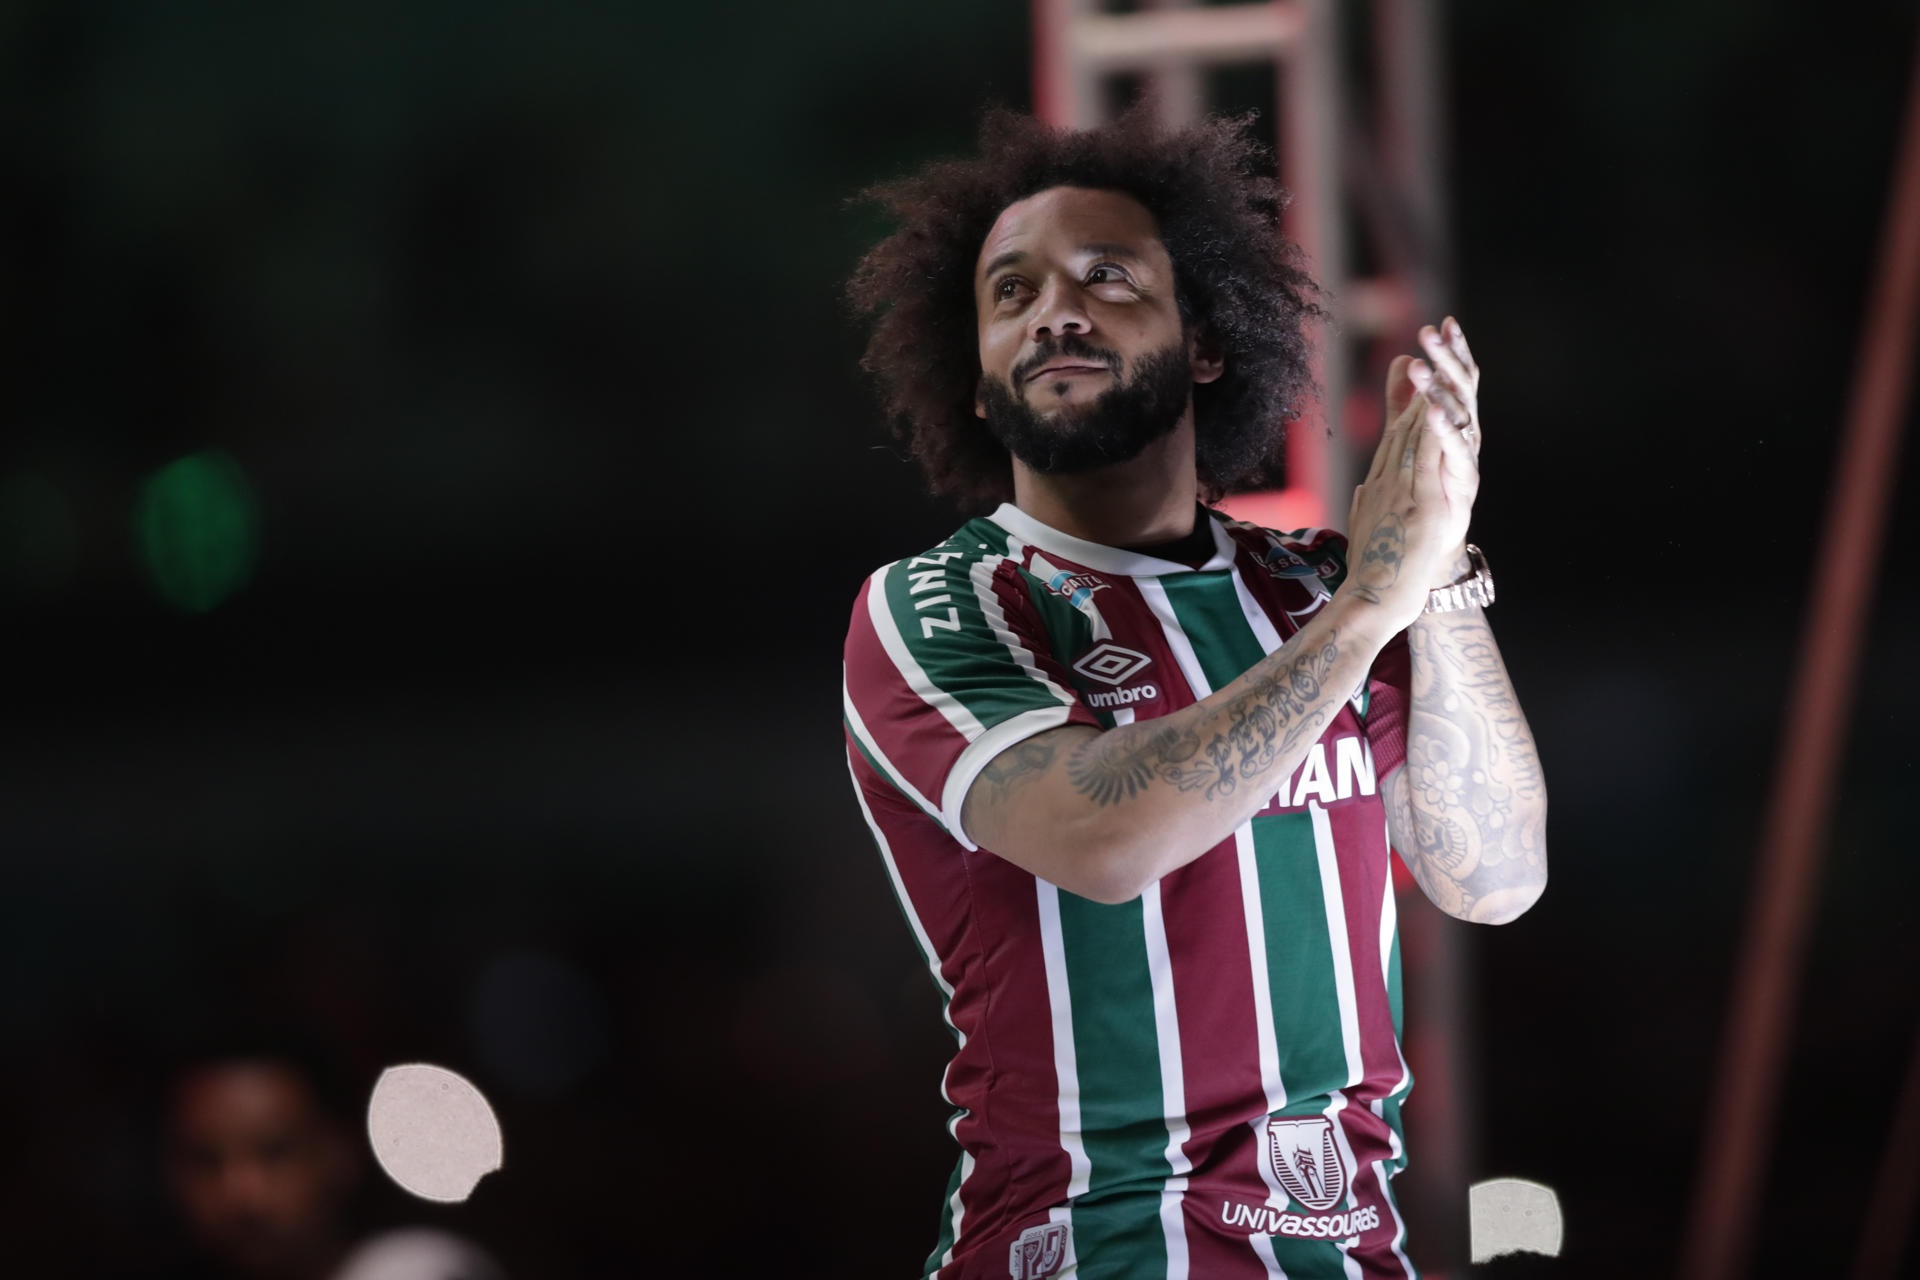 In his massive presentation with Fluminense, Marcelo avoided talking about a possible return to Real Madrid and made it clear that his only objective is to win many titles with the Brazilian side.